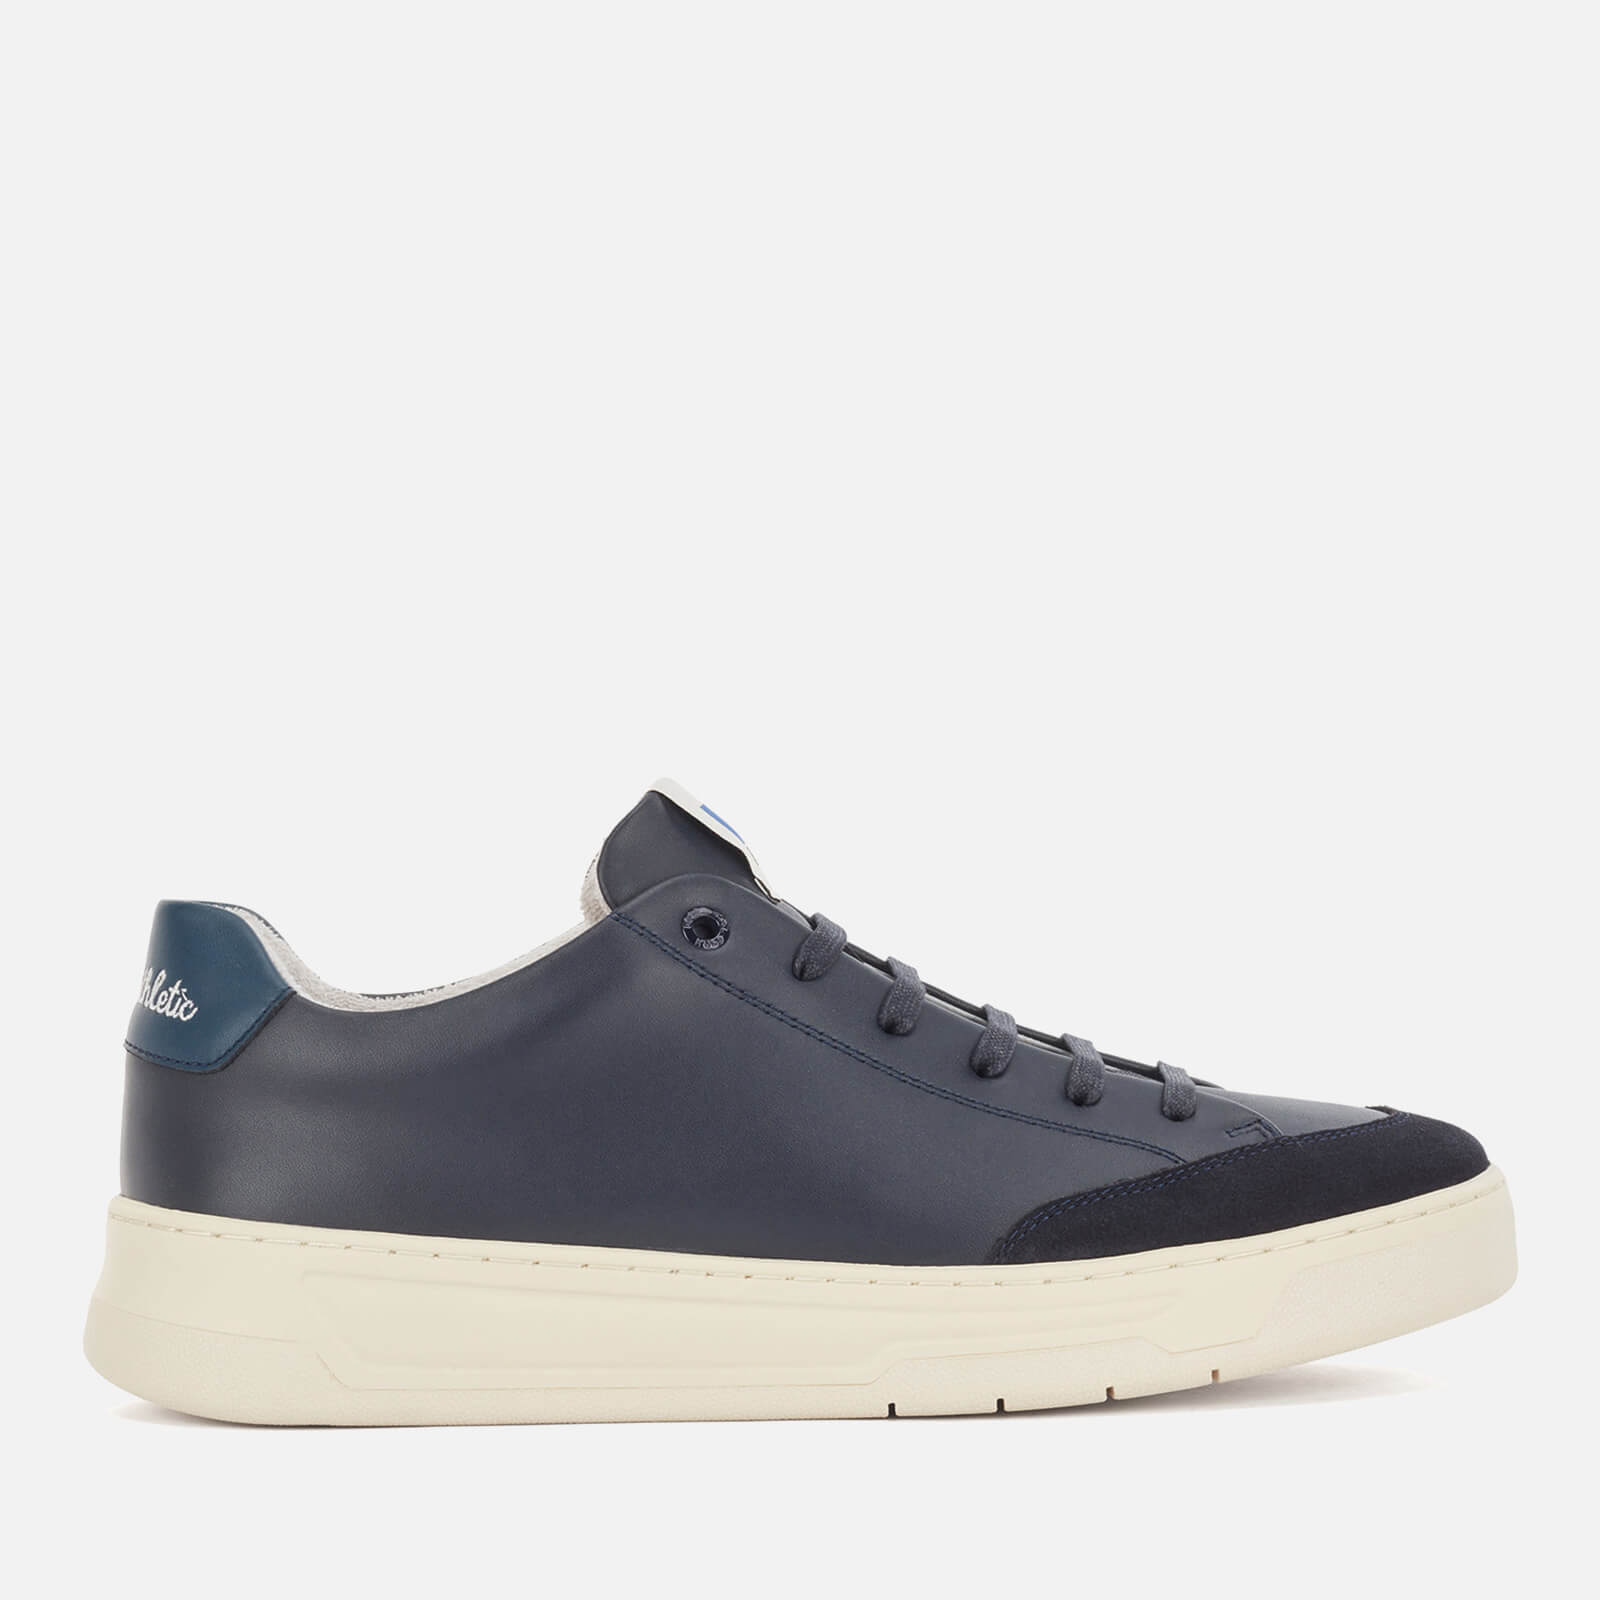 BOSS X Russell Athletic Men's Baltimore Tennis 01 Trainers - Navy - UK 7